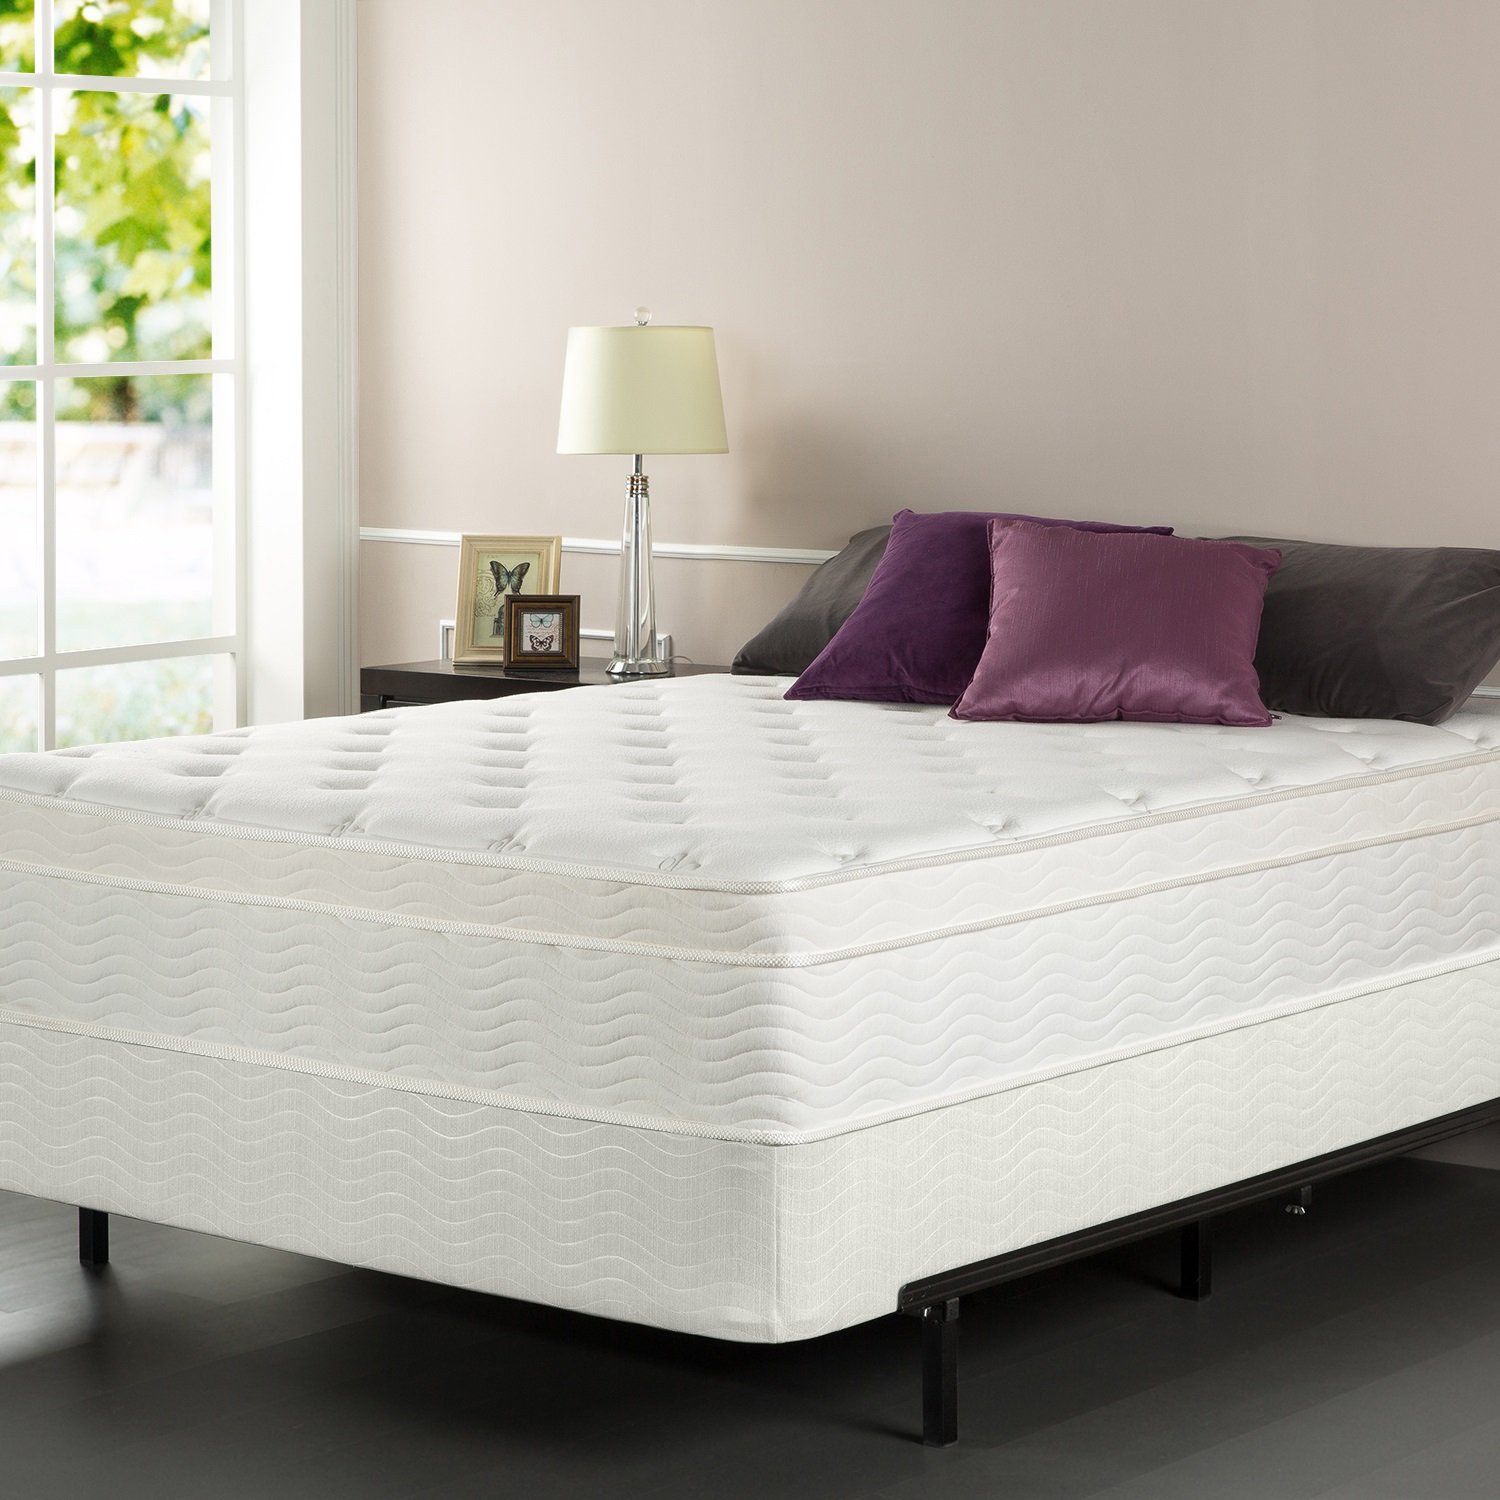 Best King Size Mattress Reviews 2018 With Relyproduct.com